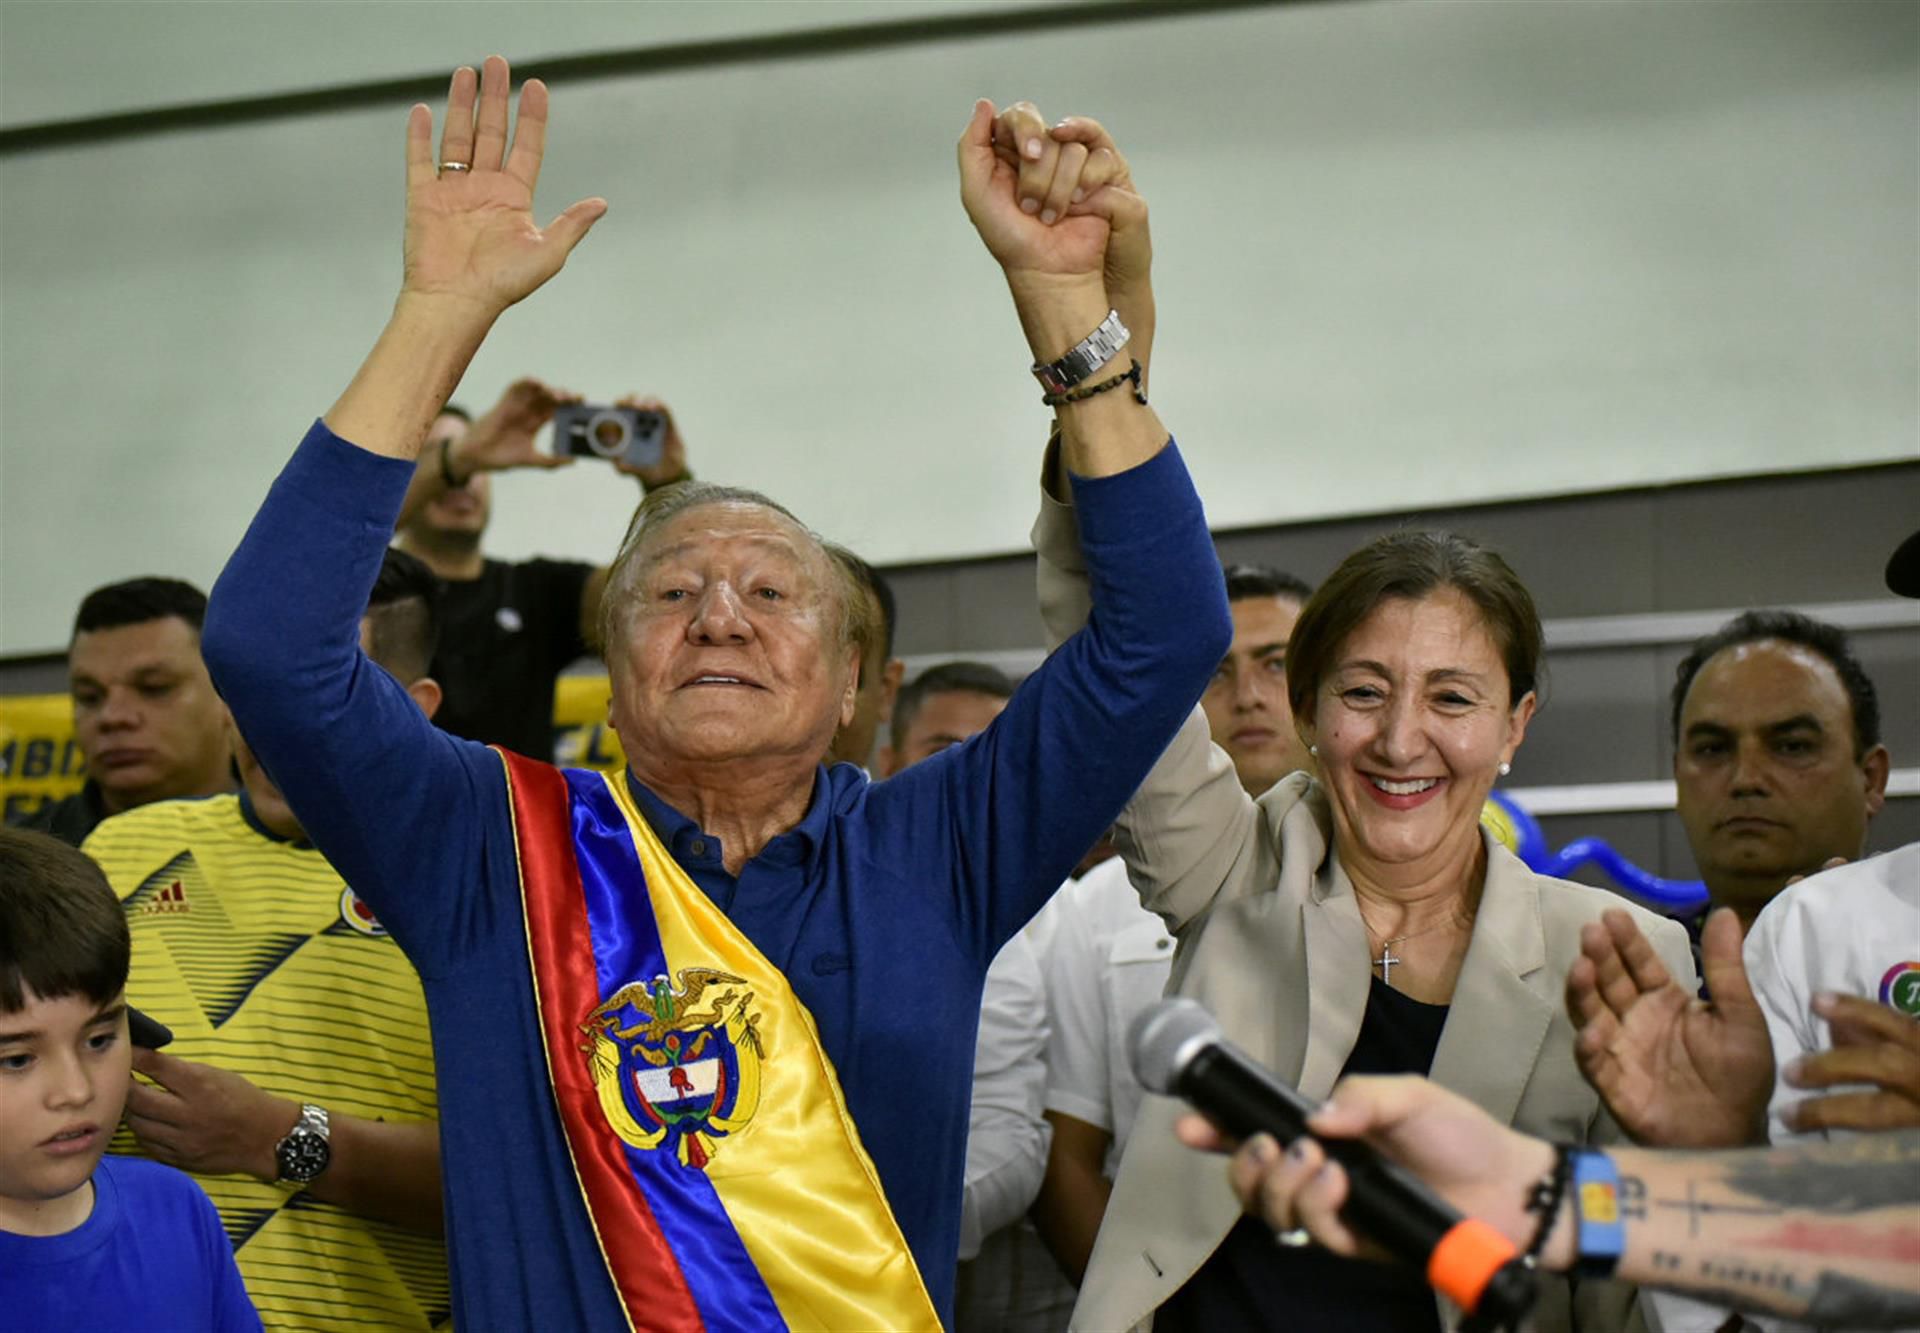 The candidate for the presidency of Colombia Rodolfo Hernández raises his arms with Íngrid Betancourt, presidential candidate until this Friday, during a campaign event in Barranquilla.  (EFE/ Str).